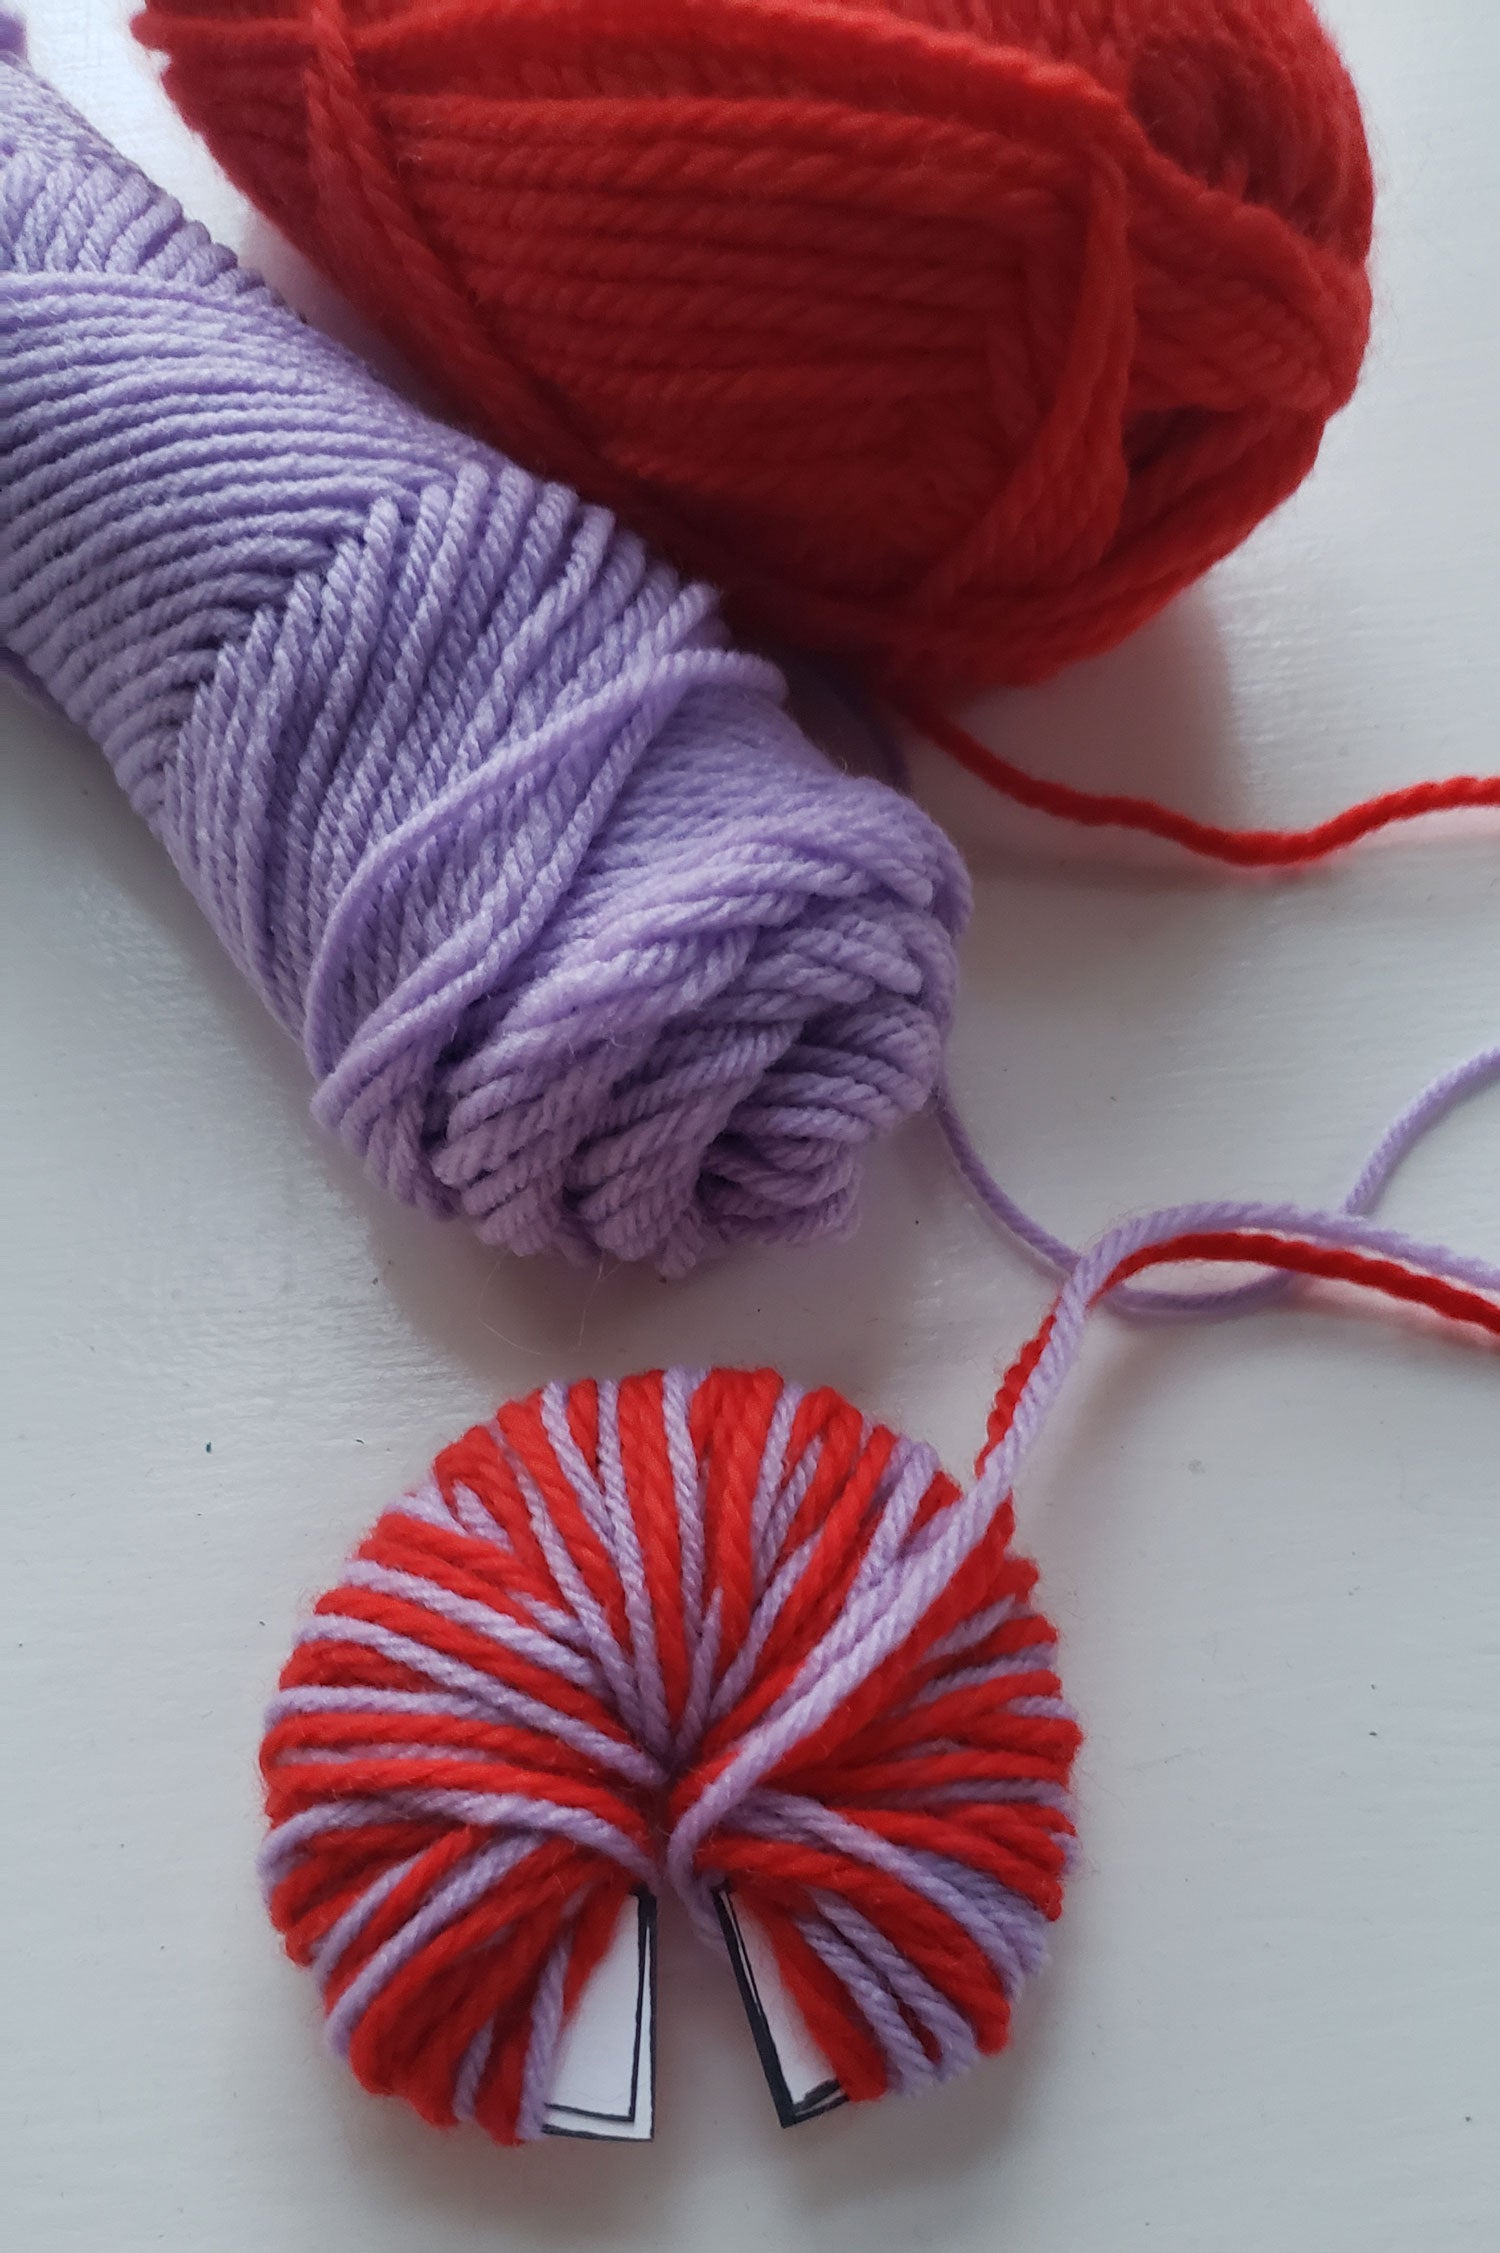 Red and purple yarn is being wrapped around a circular disk